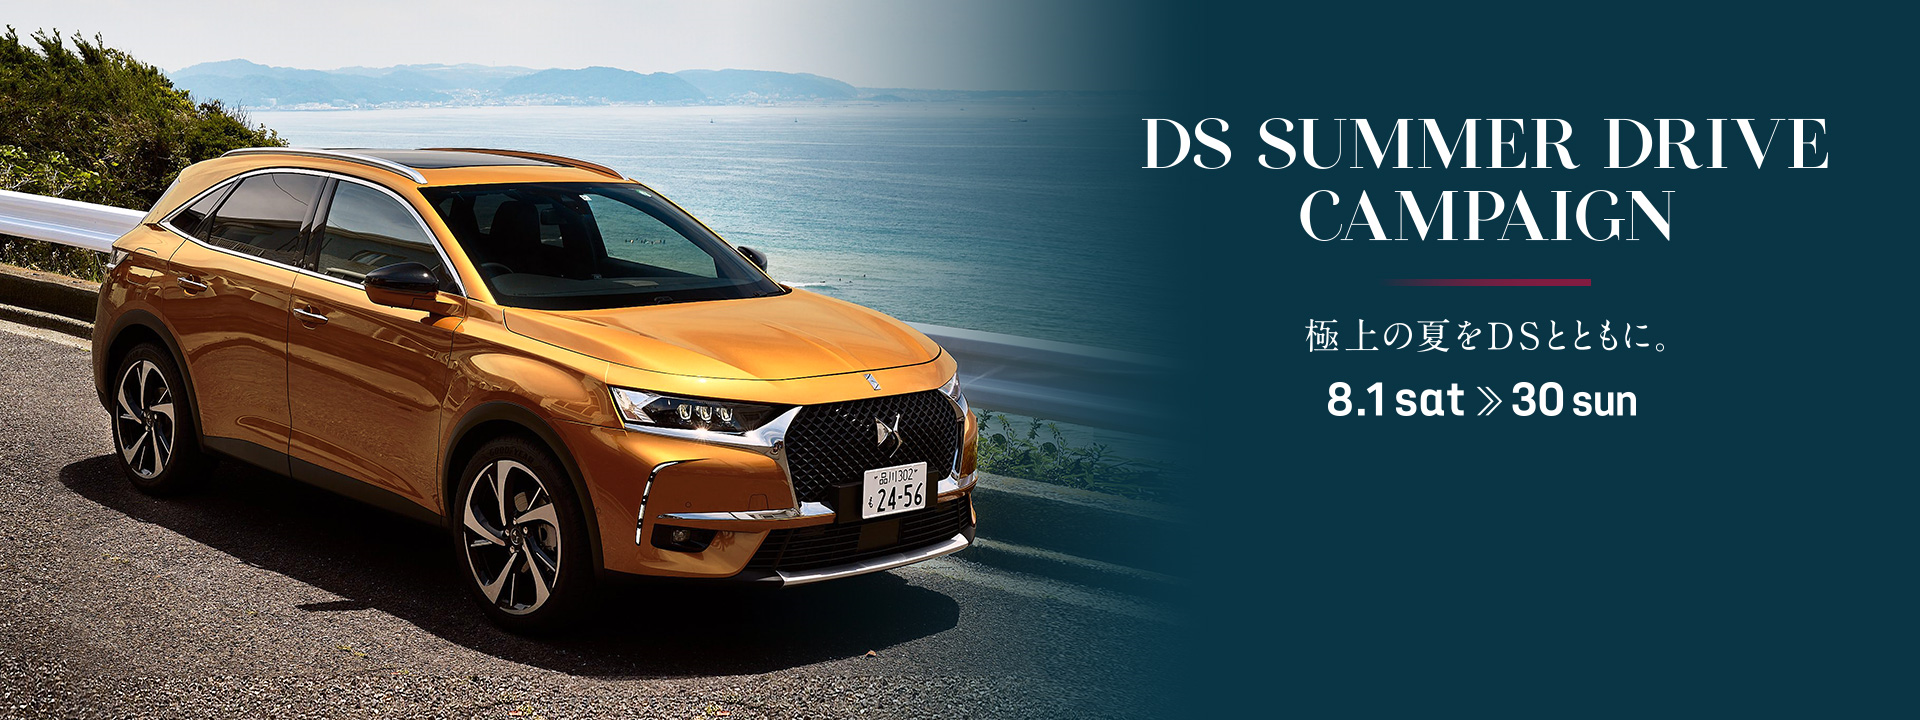 DS SUMMER DRIVE CAMPAIGN